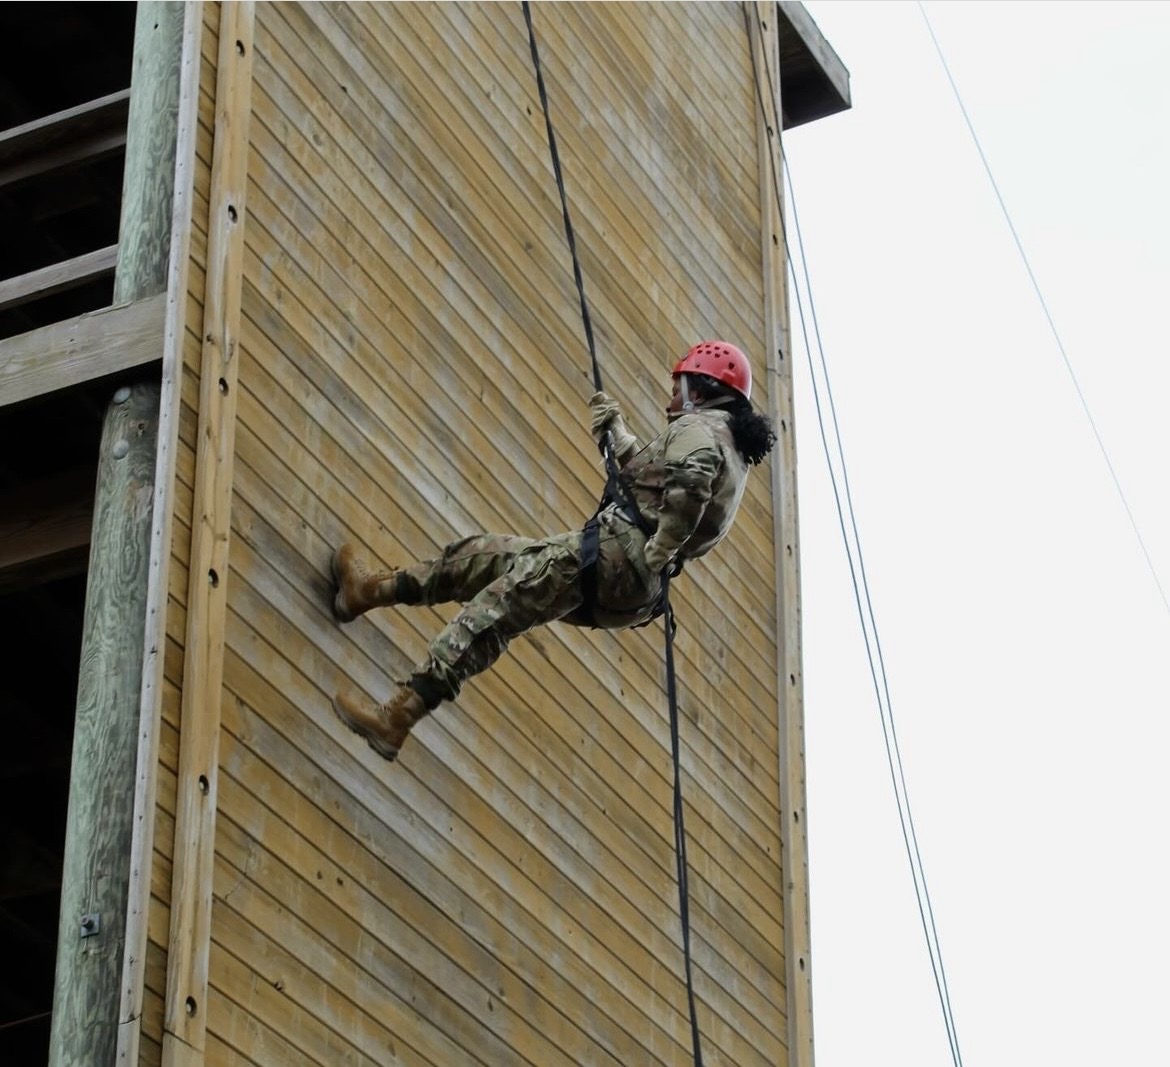 A cadet repels off of a tower during joint field training exercises.